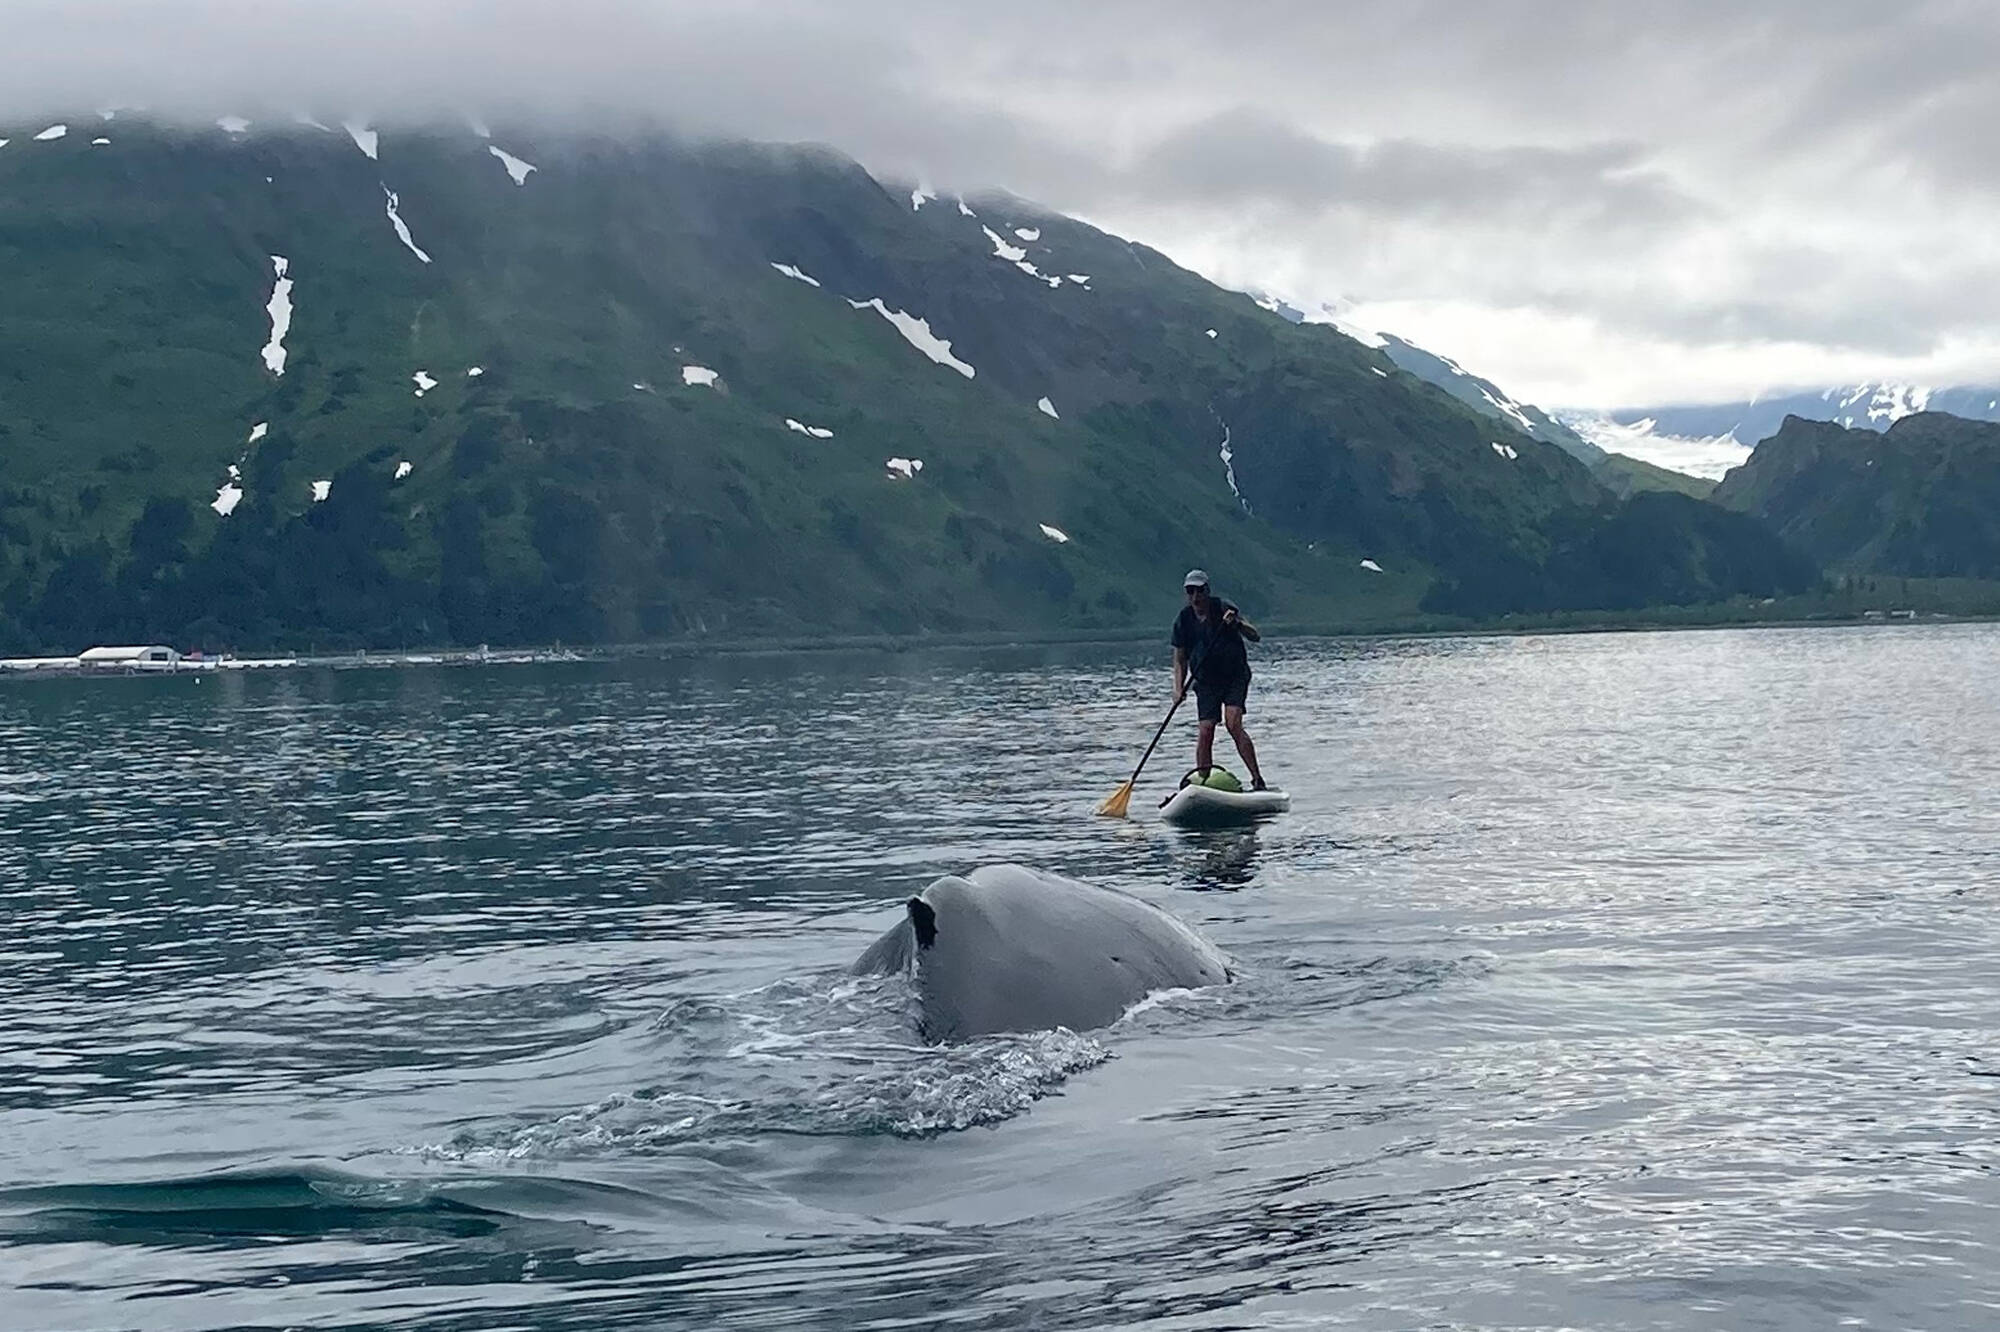 In this photo provided by Brian Williams, a whale approaches his father, Kevin Williams, while he was paddleboarding in Prince William Sound near Whittier on July 13. Williams survived the close encounter with a humpback whale, not even getting wet during a tense few seconds caught on camera by friends and family as a whale surfaced near him.